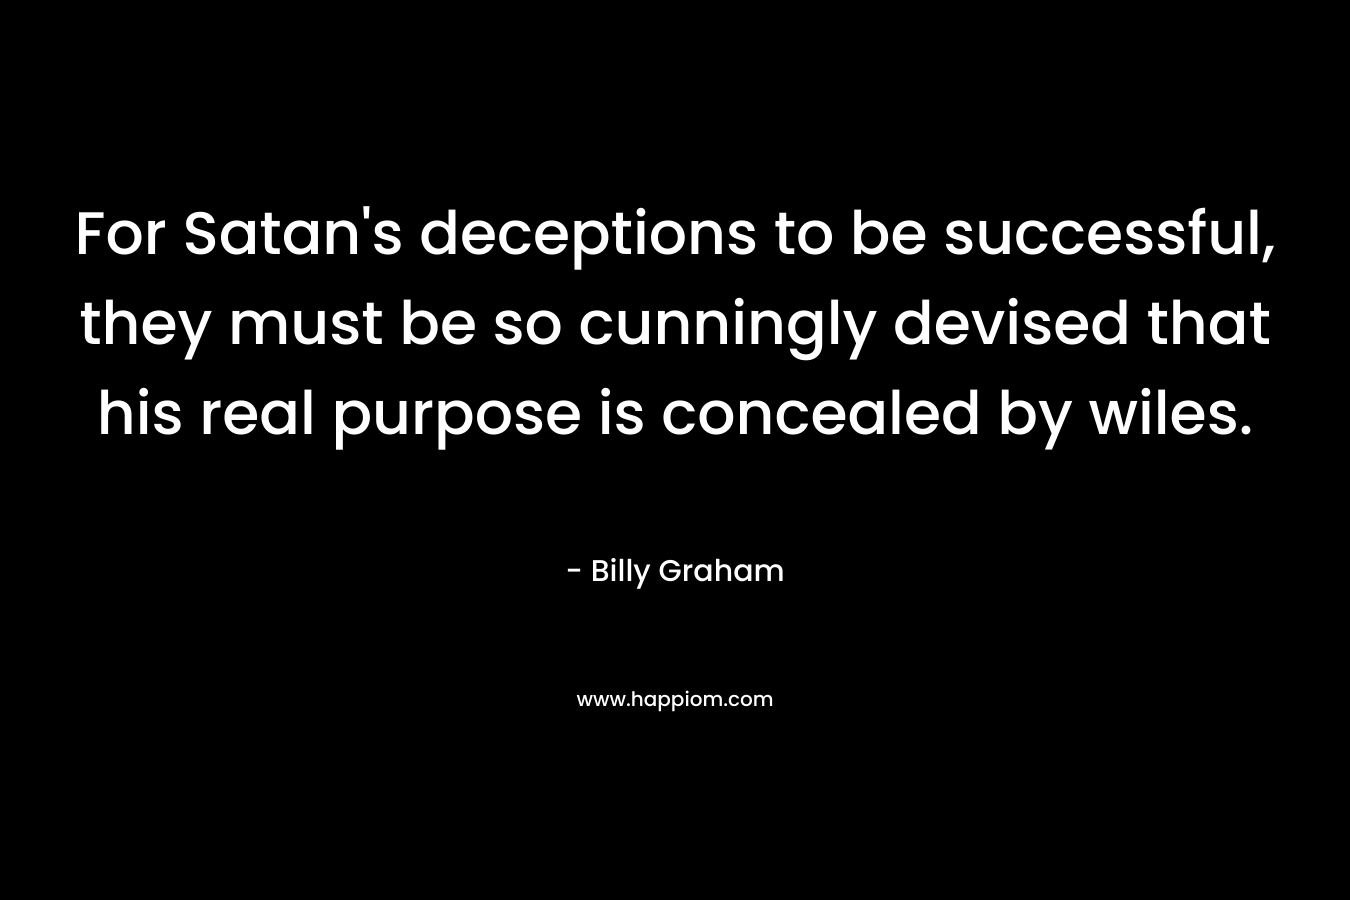 For Satan's deceptions to be successful, they must be so cunningly devised that his real purpose is concealed by wiles.